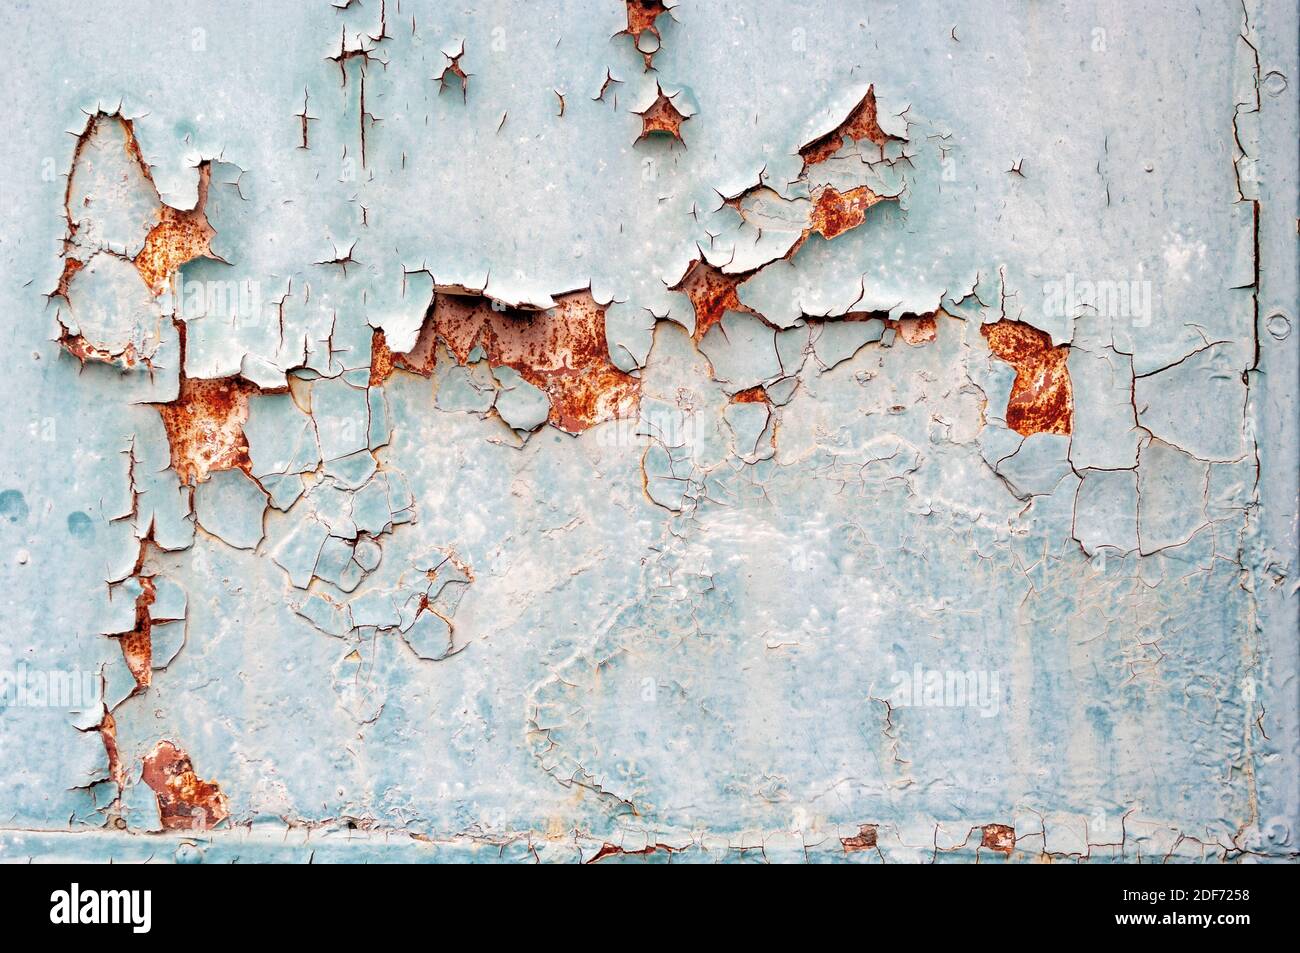 Old rusty metal texture background Stock Photo